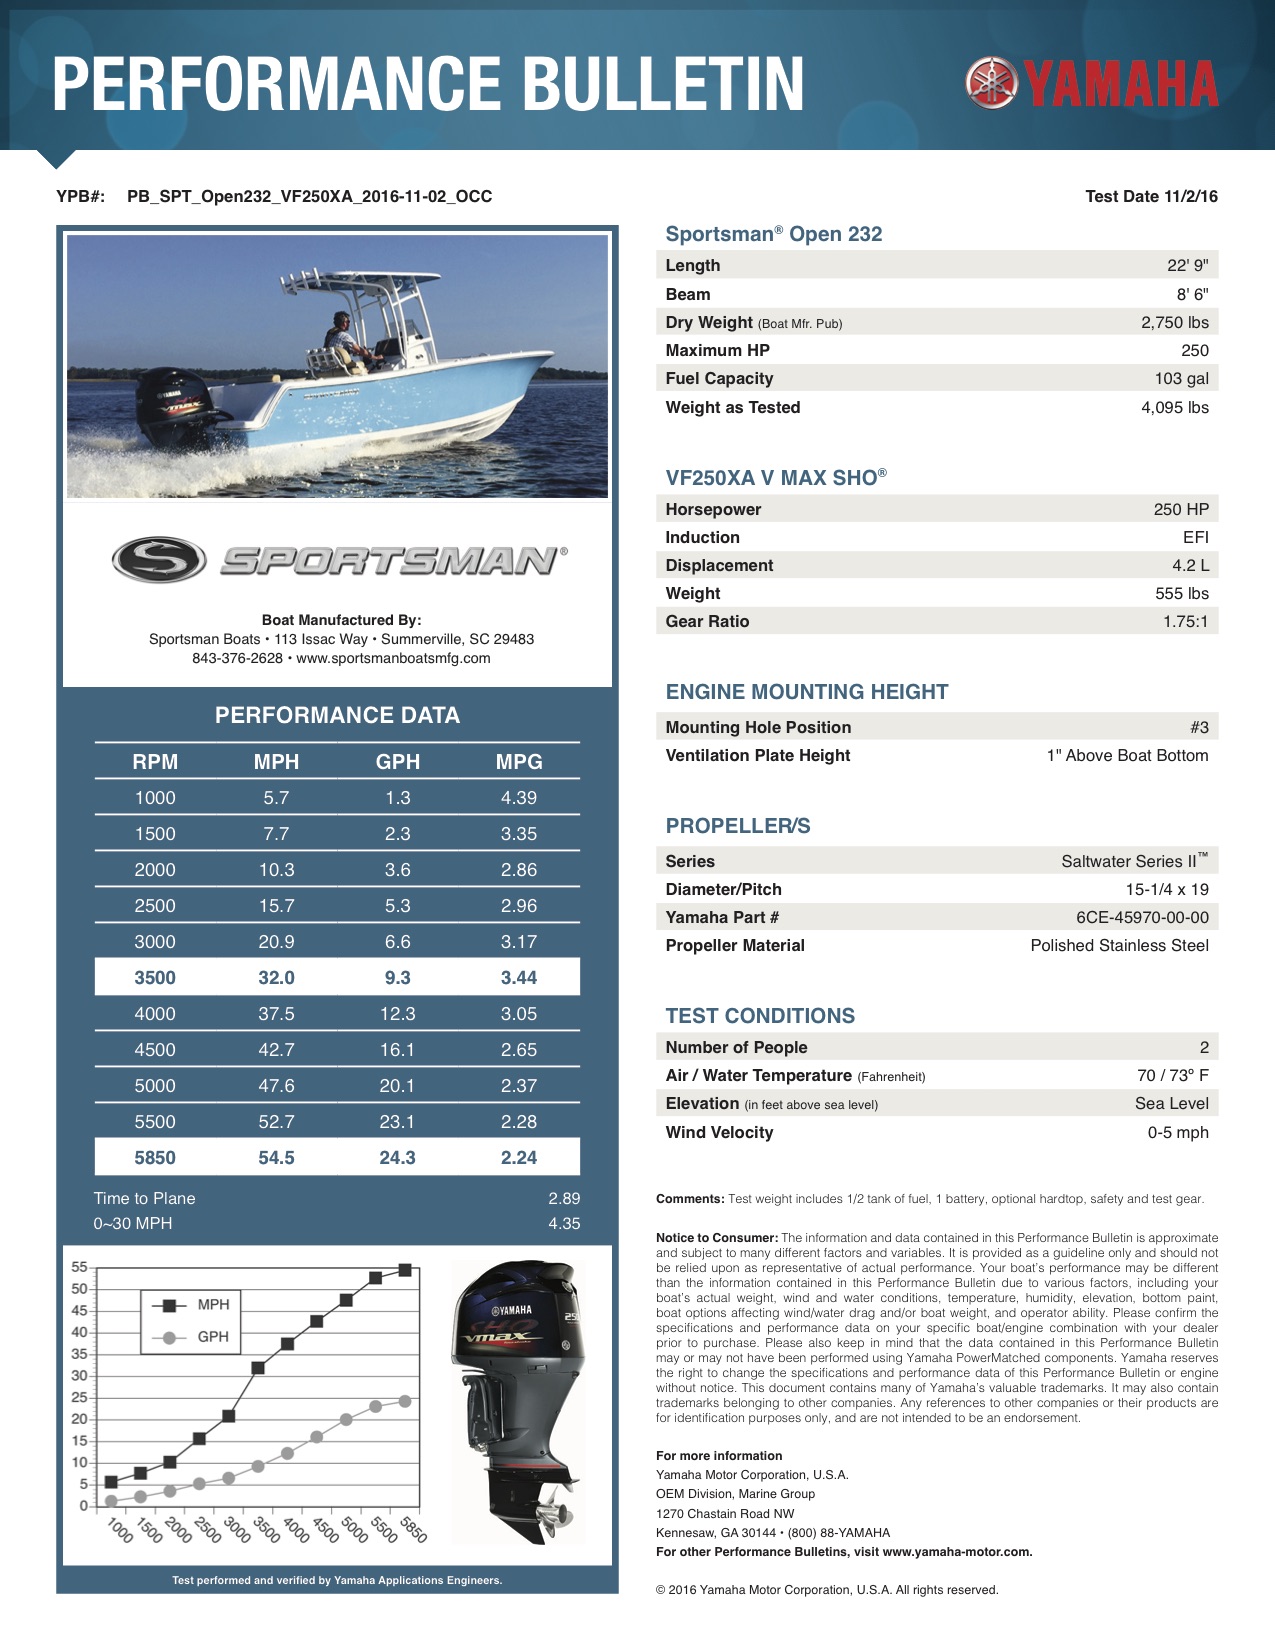 Performance bulletin for 232-center-console